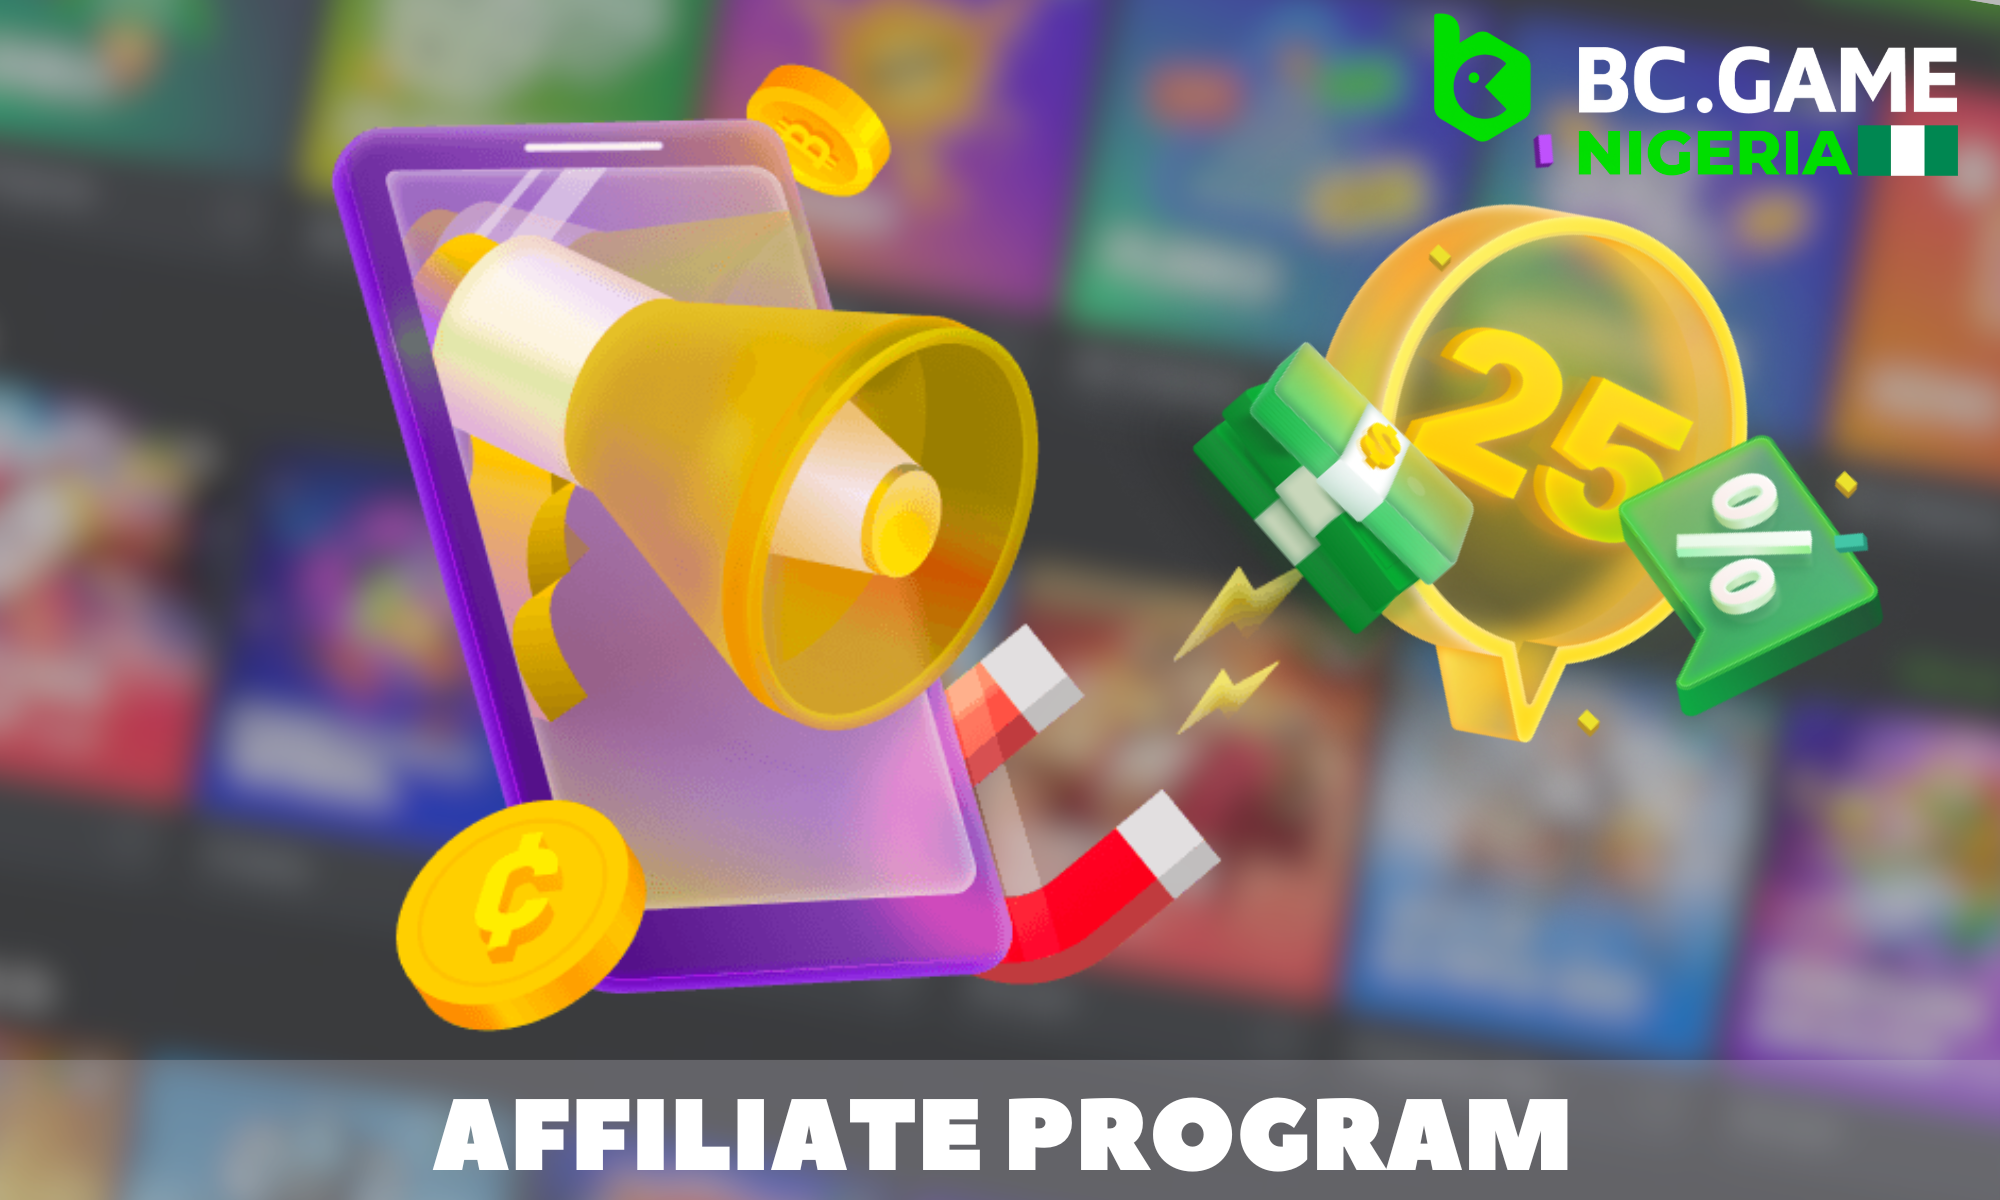 BC Game offers everyone access to the affiliate program